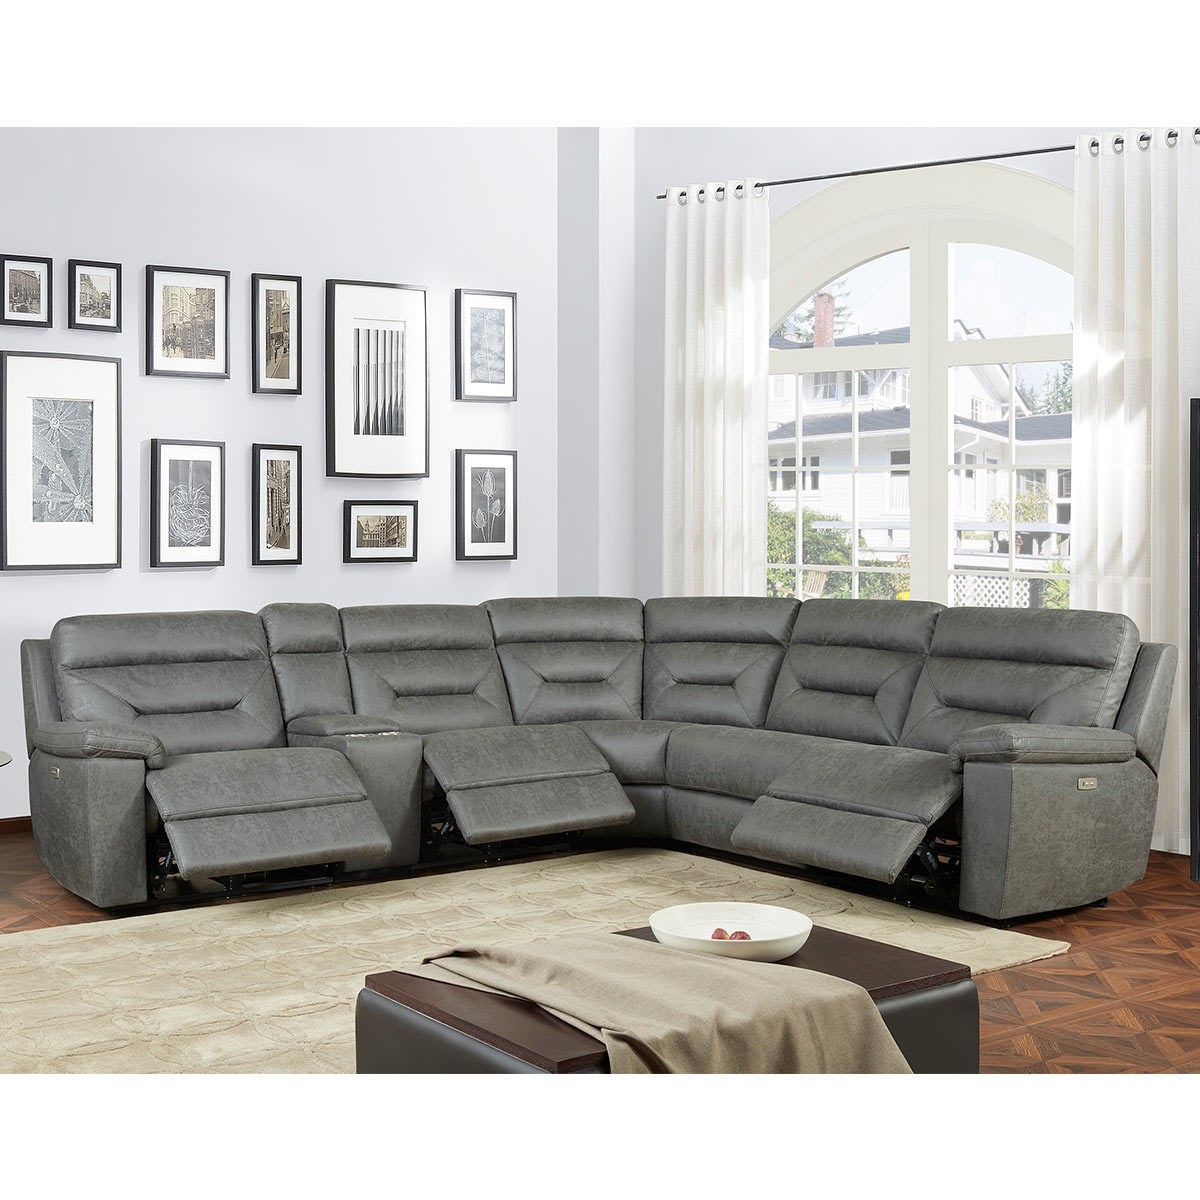 Gilman Creek Justin Grey Fabric Power, Small Sectional Sofas With Recliners And Cup Holders